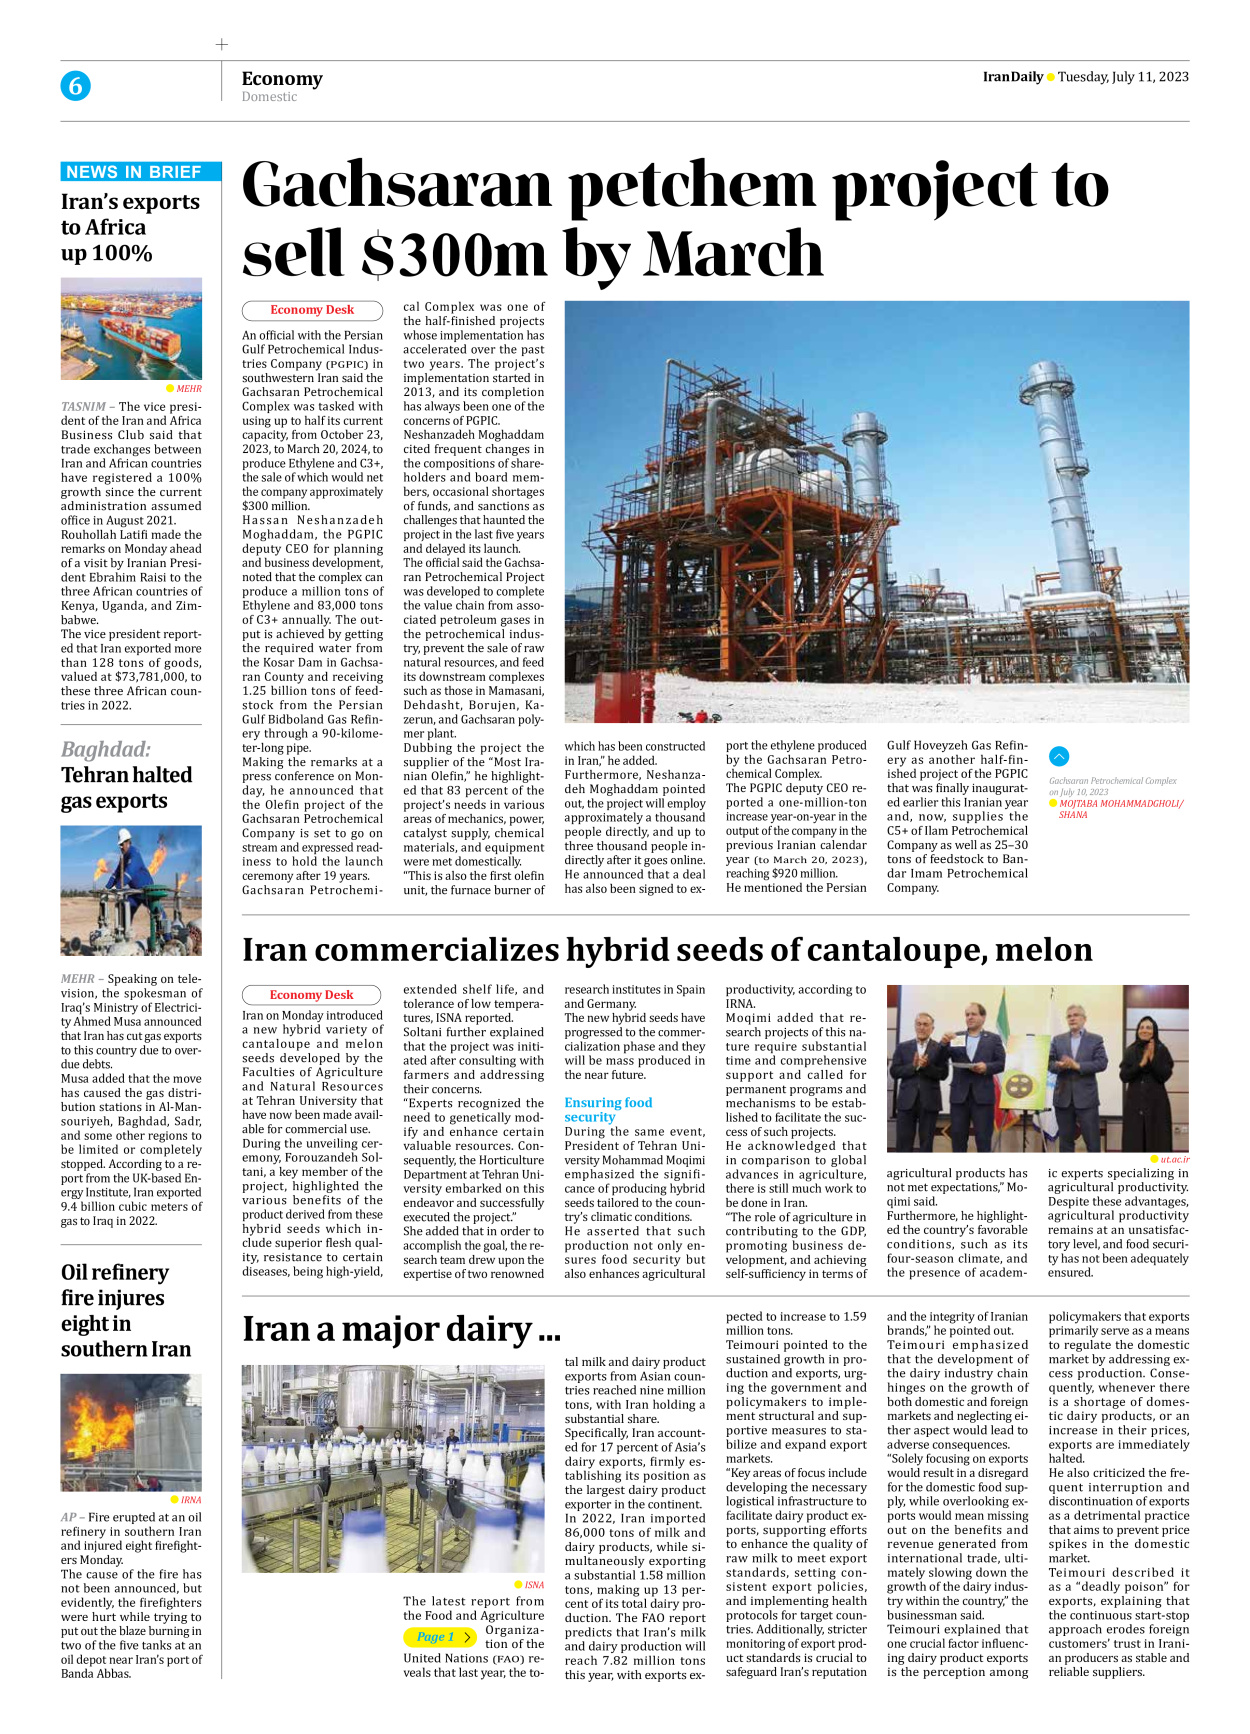 Iran Daily - Number Seven Thousand Three Hundred and Thirty Six - 11 July 2023 - Page 6